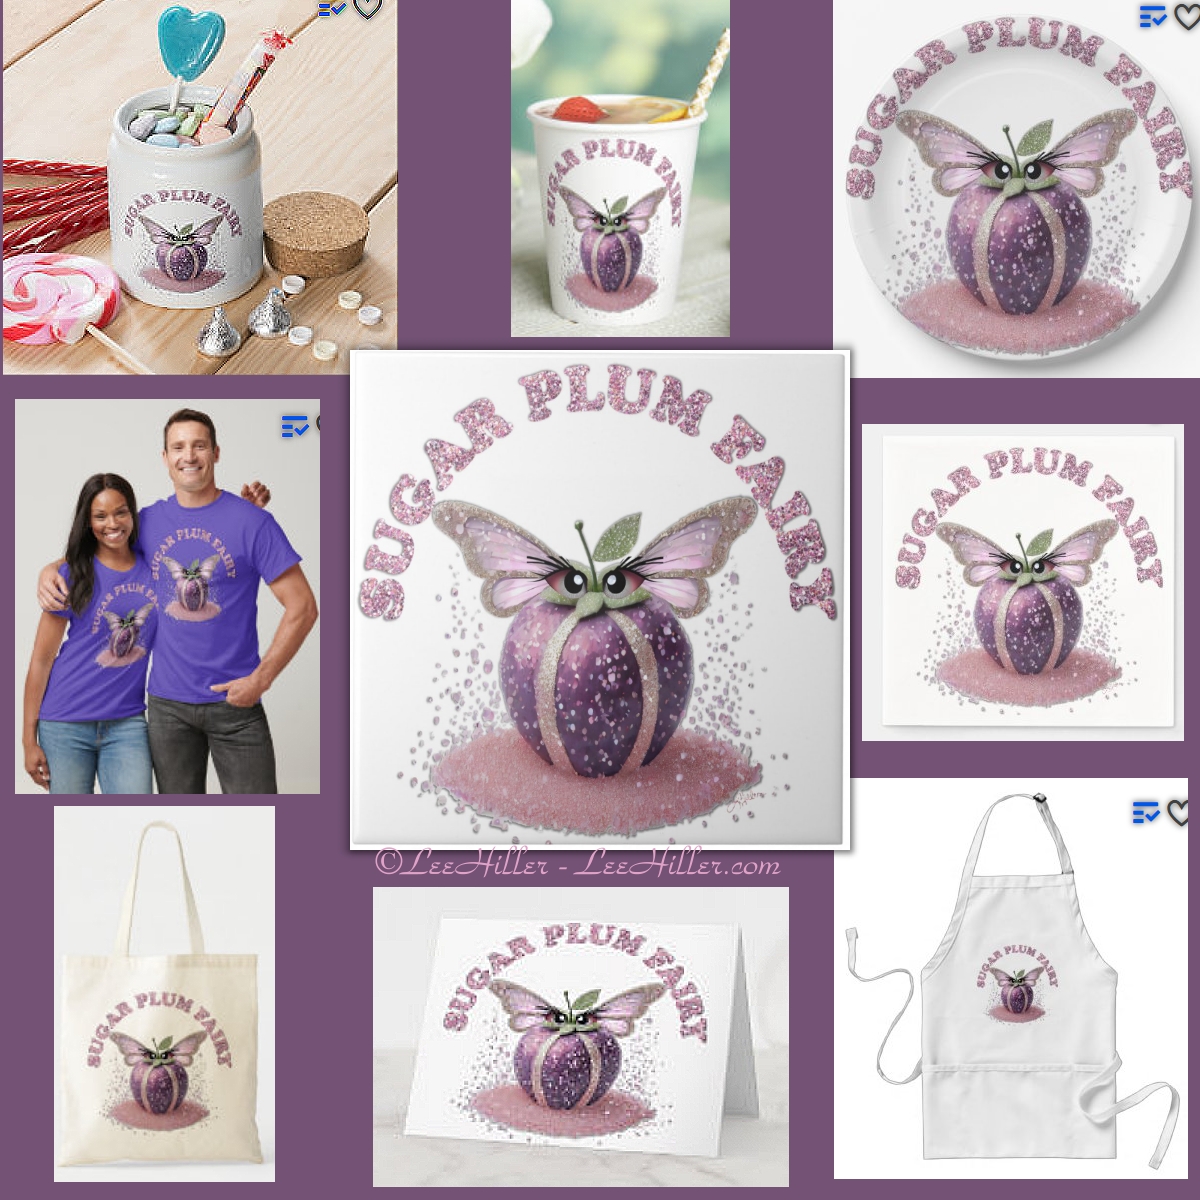 🎄🫒💜🎄 💜🫒🎄 Tis The Season for Holiday Cheer A Sugar Plum Fairy zazzle.com/collections/a_… #Christmas #SugarPlum #SugarplumFairy #HolidayGifts #gifts #holidays #candyjar Paper #Cups #plates #napkins #tshirts #aprons #totebag #greetingcards